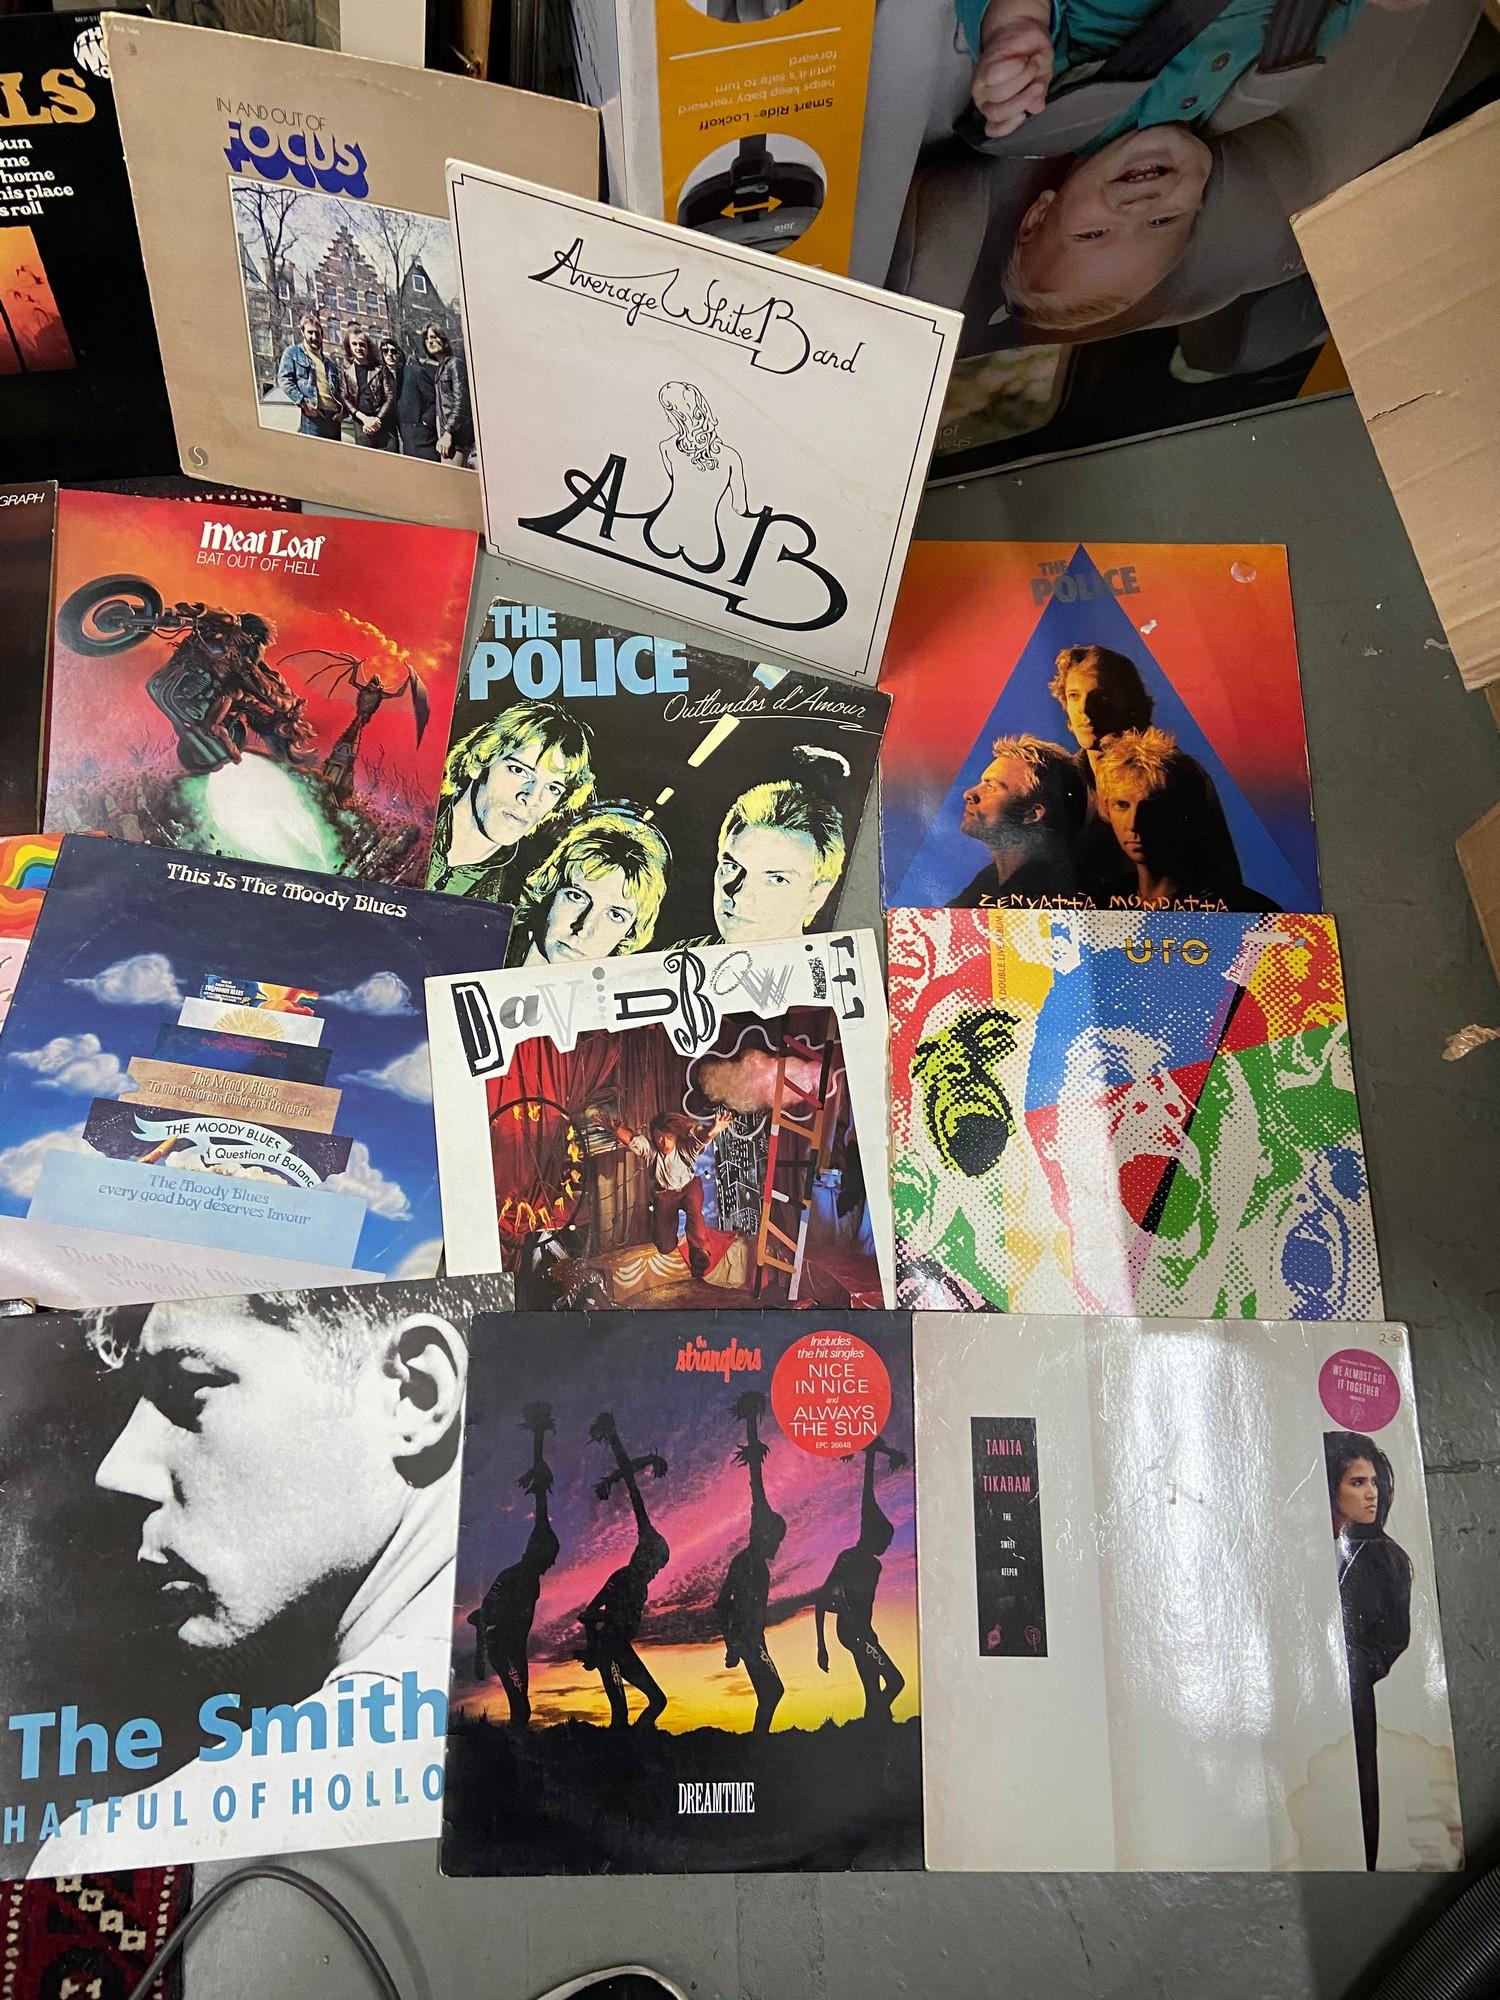 A Collection of LPS, including Pink Floyd, Stones, Barclay James Harvest, Madness, Police, U2, - Image 5 of 5